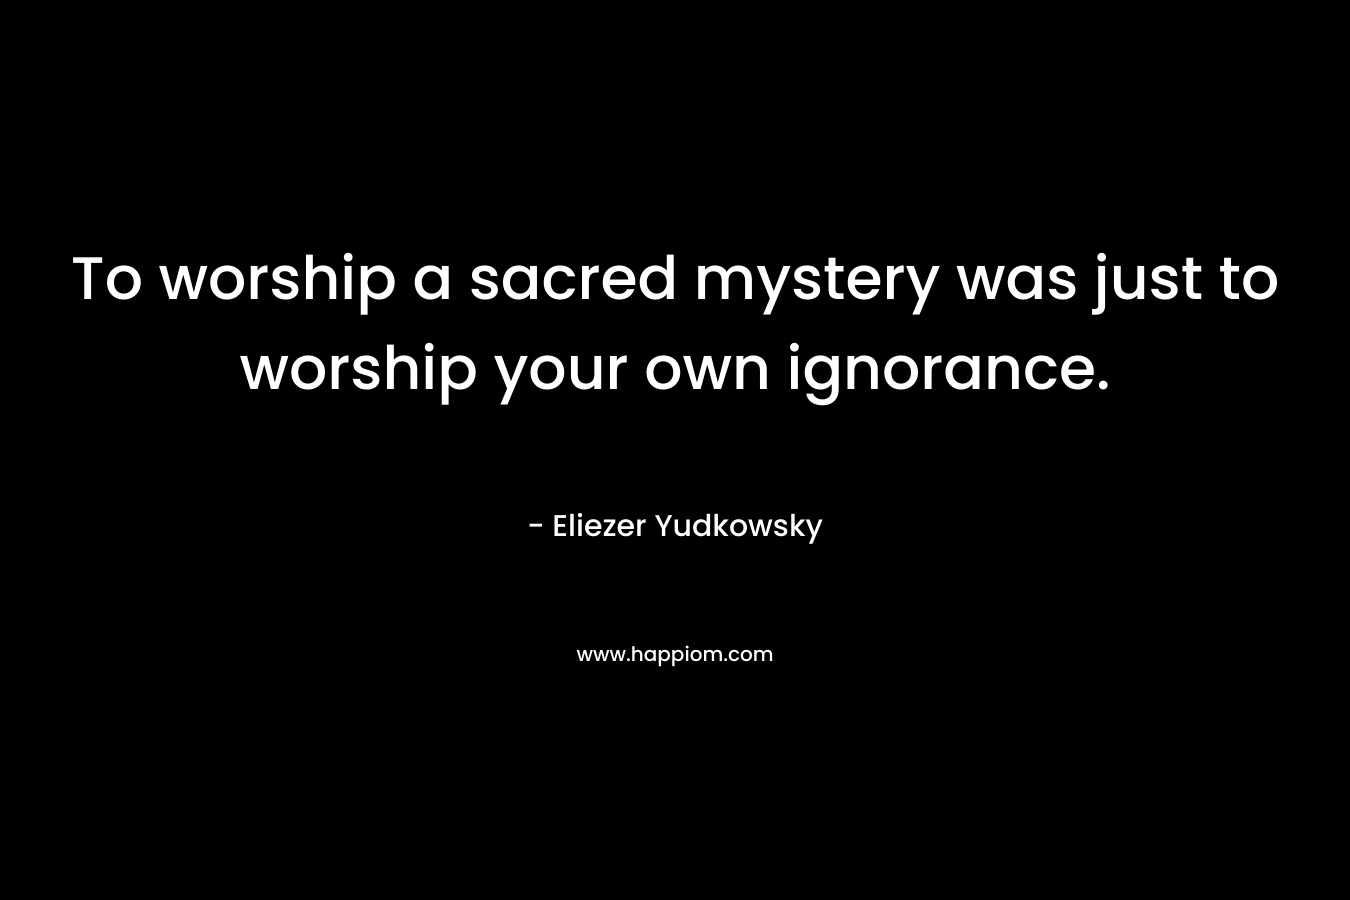 To worship a sacred mystery was just to worship your own ignorance.